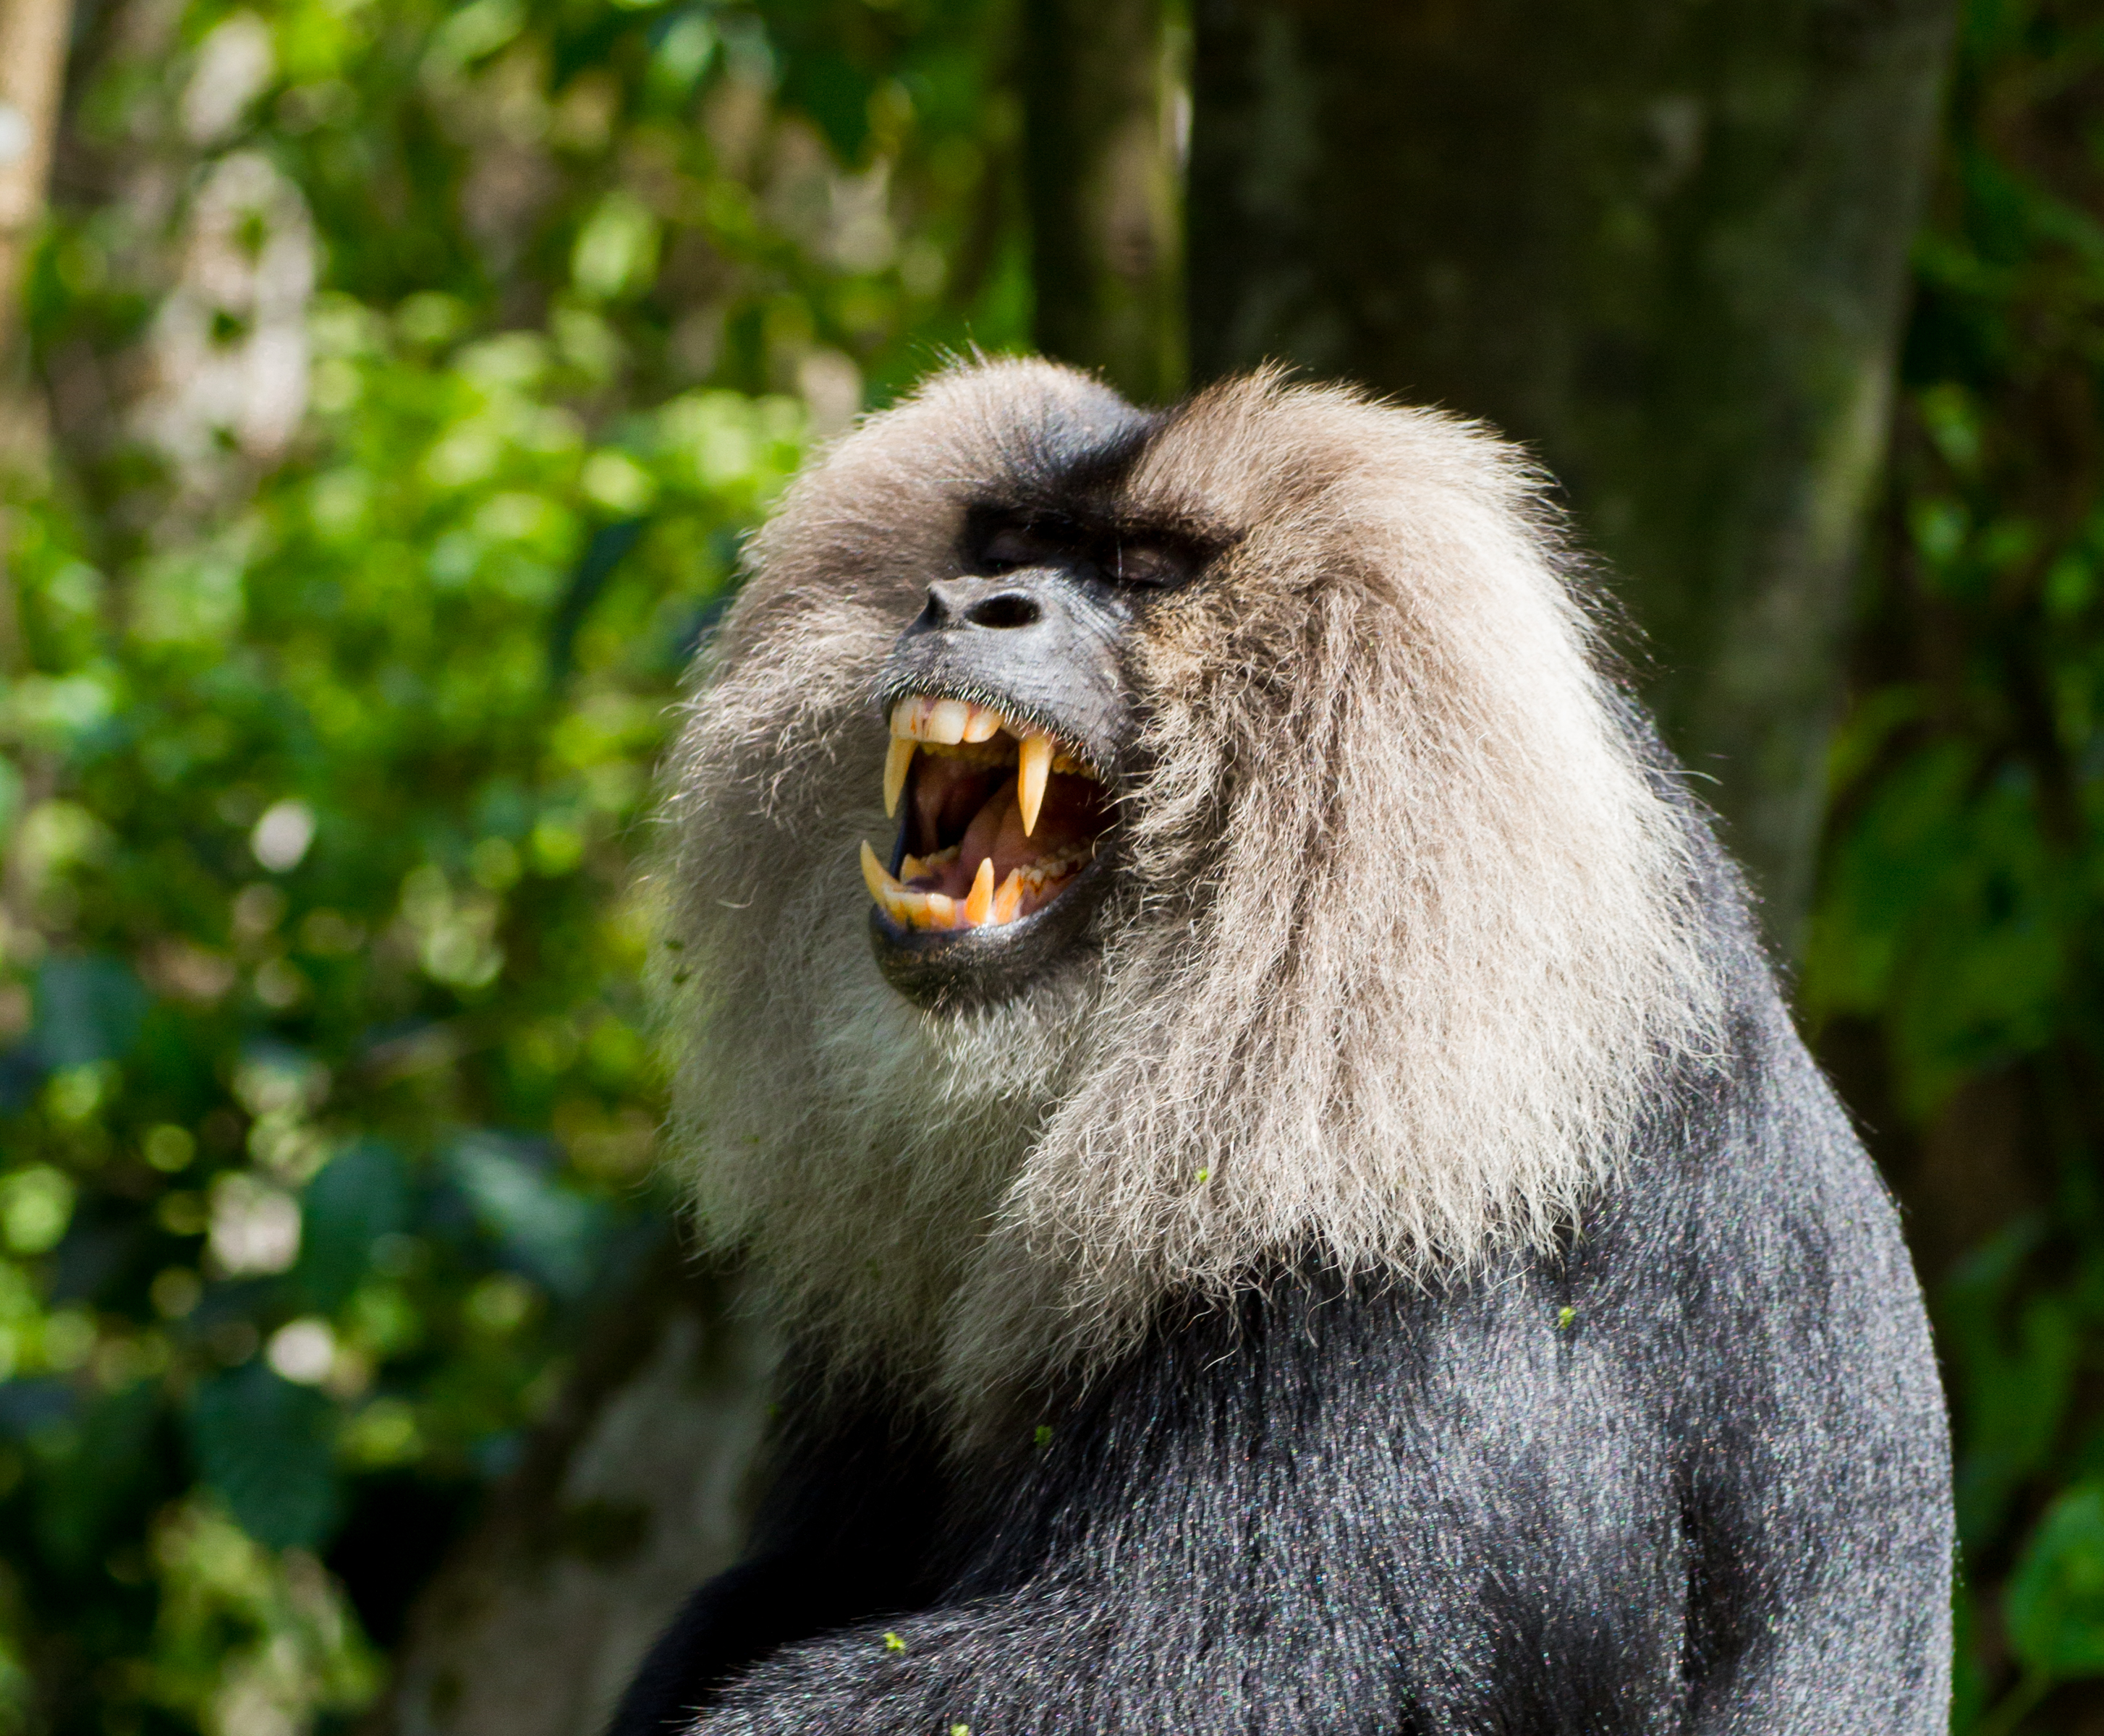 File:Lion-tailed macaque 3 by N A Nazeer.jpg - Wikimedia Commons